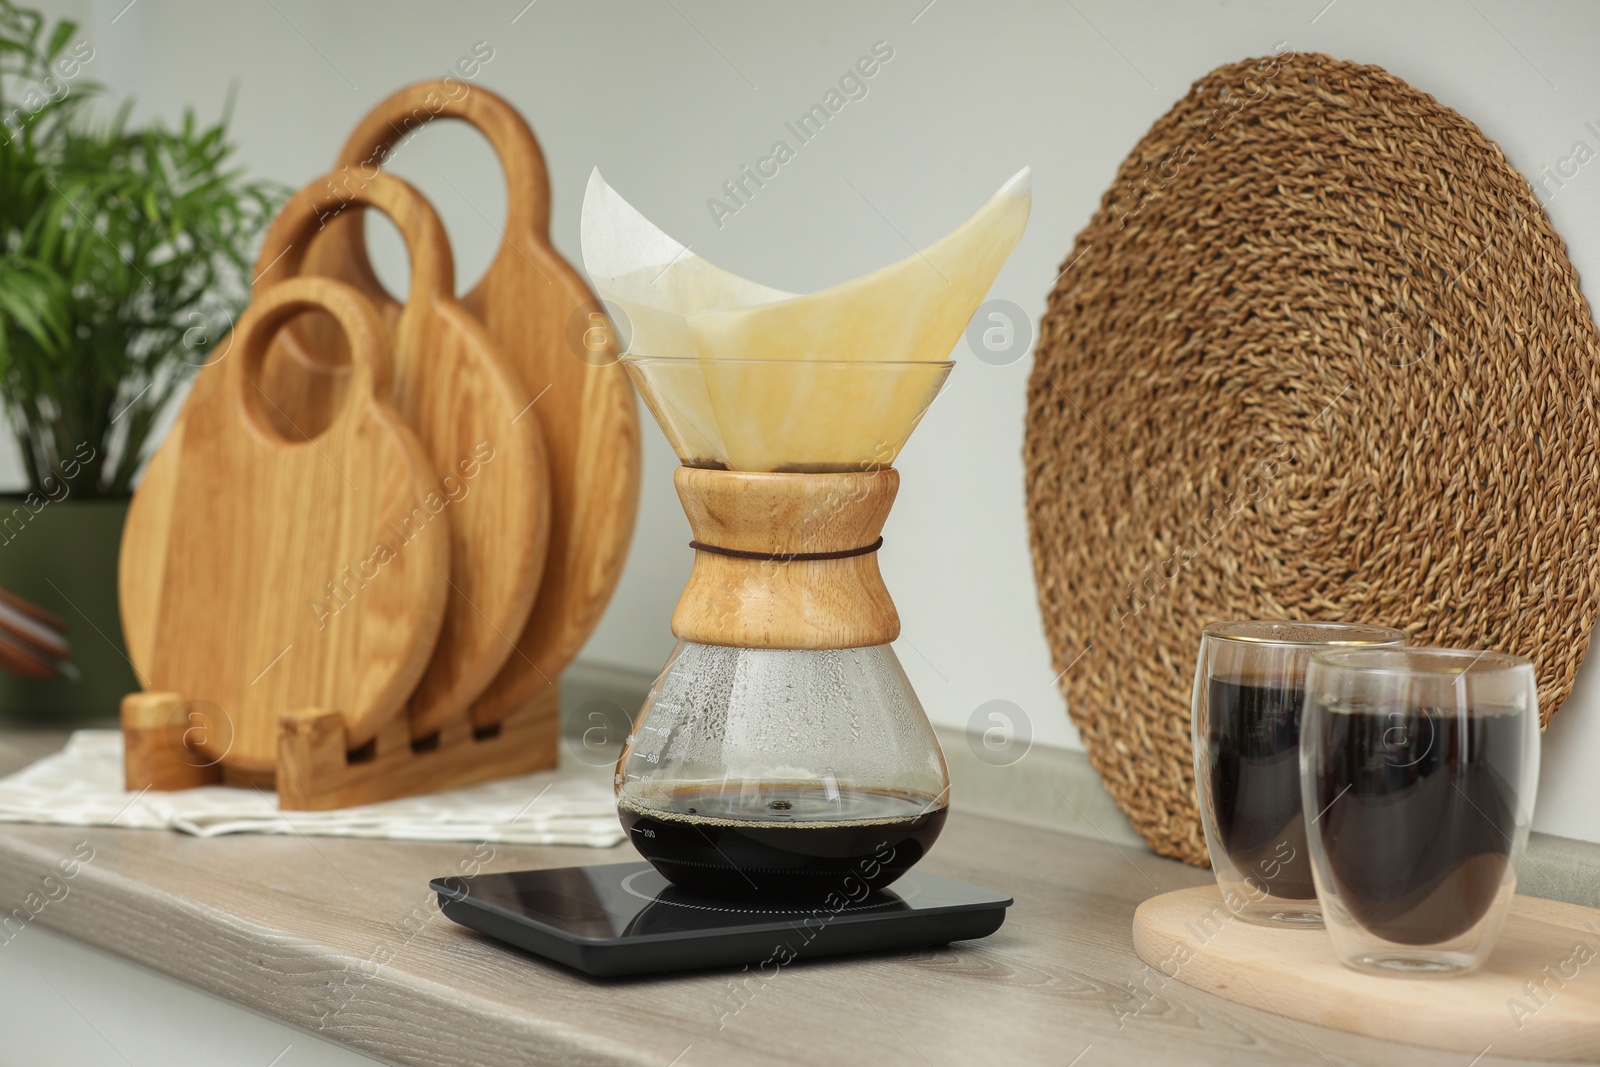 Photo of Glass chemex coffeemaker with paper filter, scales and glasses of coffee on wooden countertop in kitchen